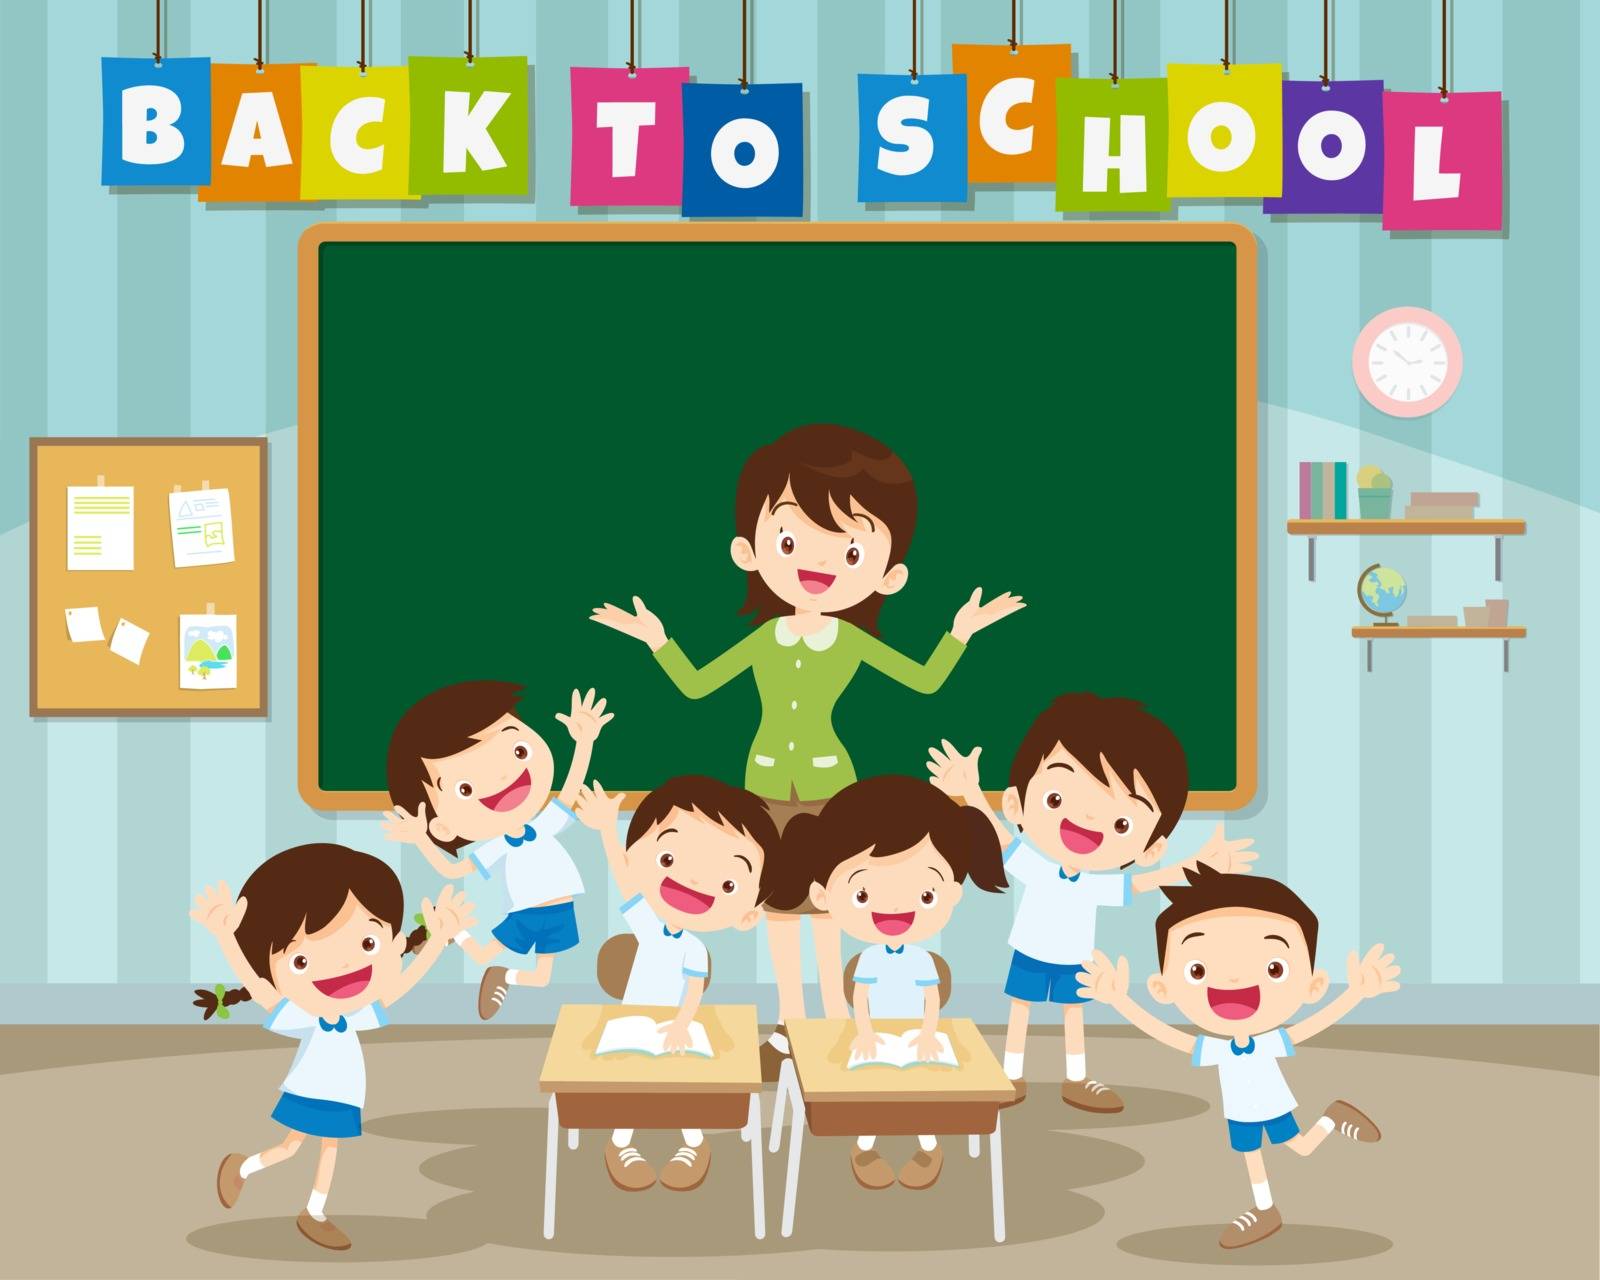 back to school with primary school pupil by niwat_s@hotmail.com